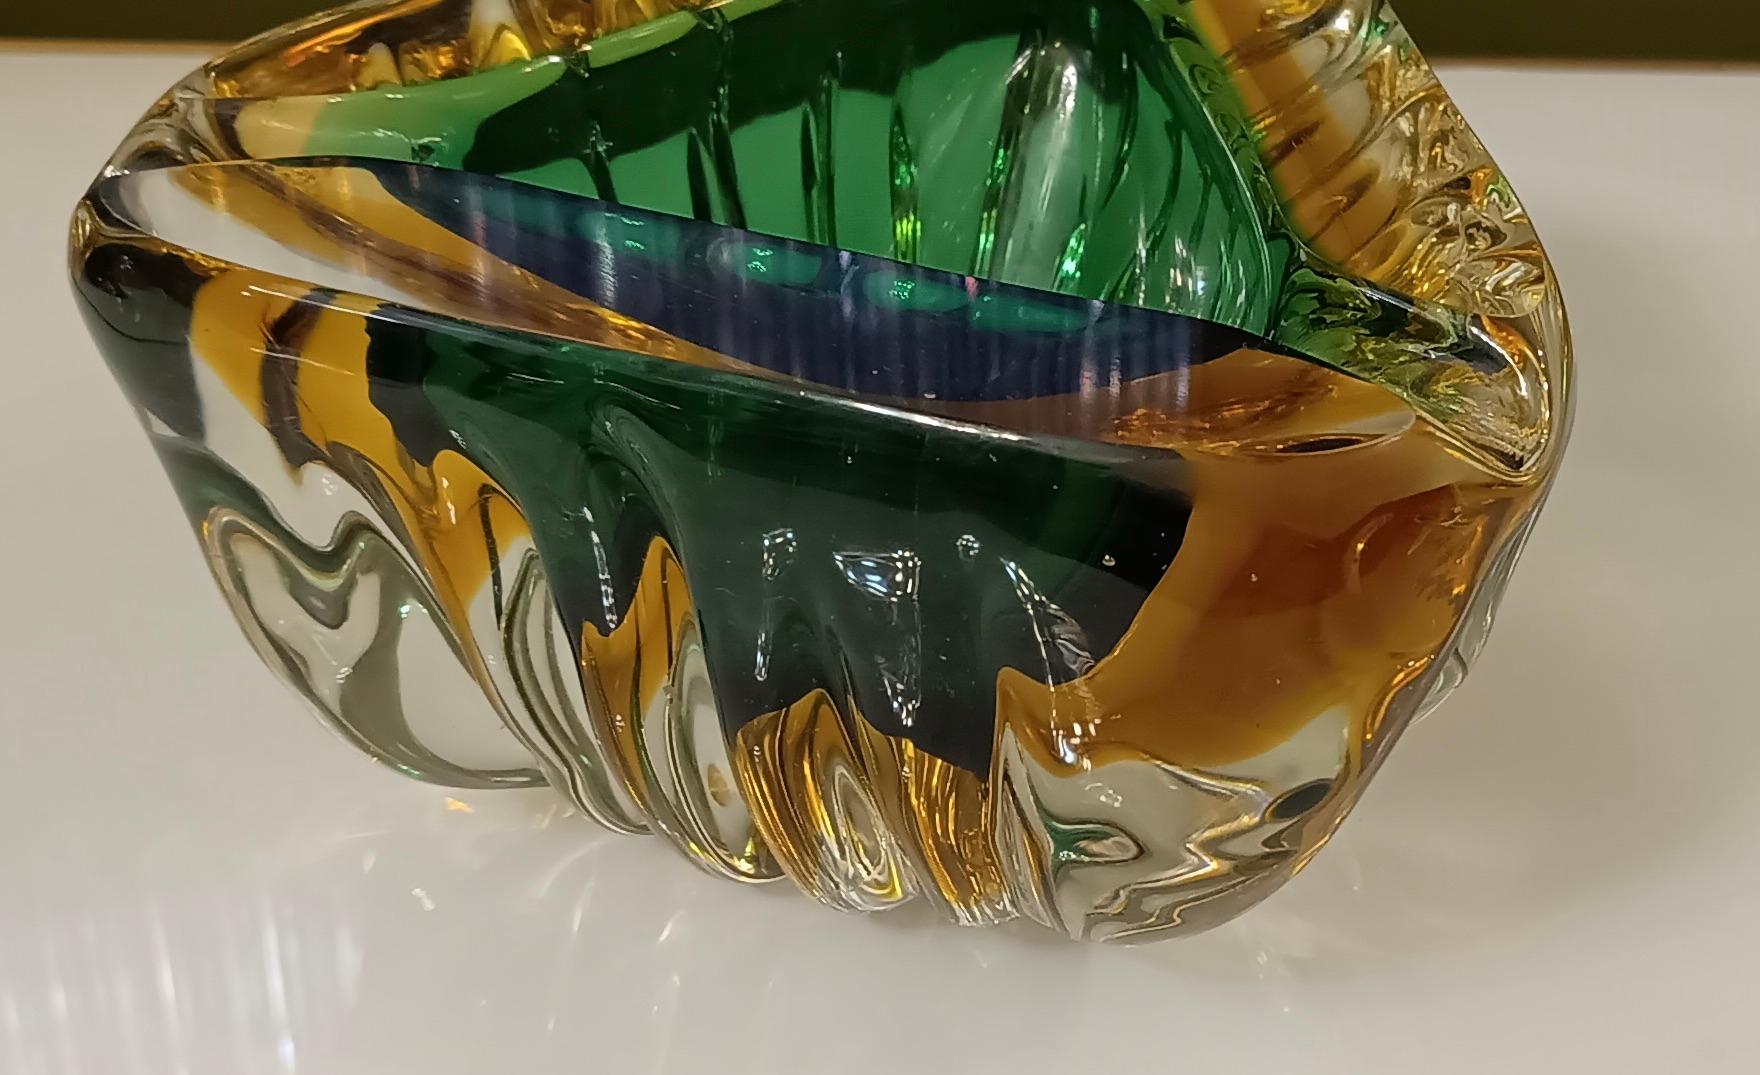 Ashtray made of a particular submerged glass, with a wonderful double color of green and yellow. Refinement and class as in the Murano style, one-of-a-kind pieces that always remain precious.

The ashtray is made of Murano glass, triangular in